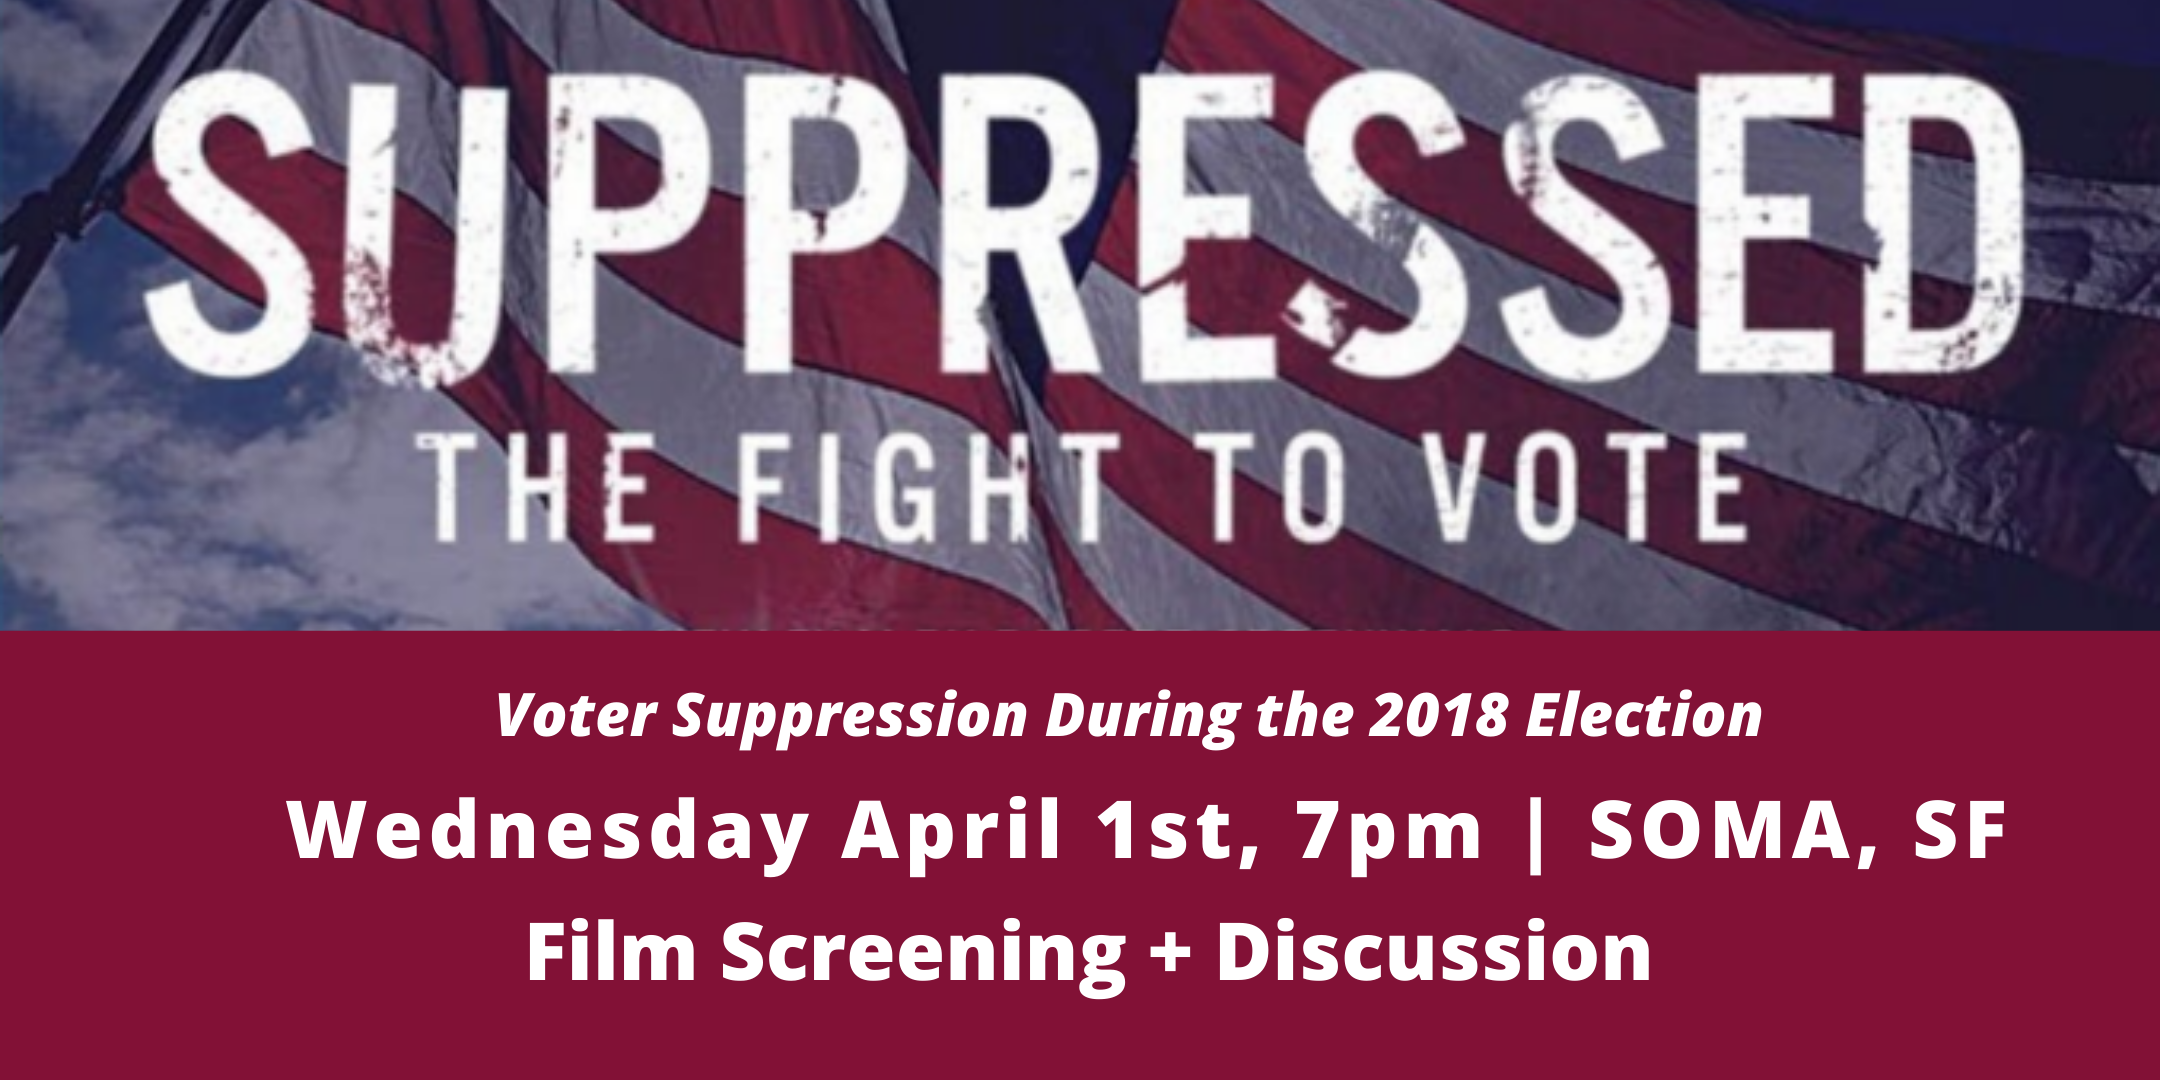 Suppressed: The Fight to Vote | Film Screening + Discussion